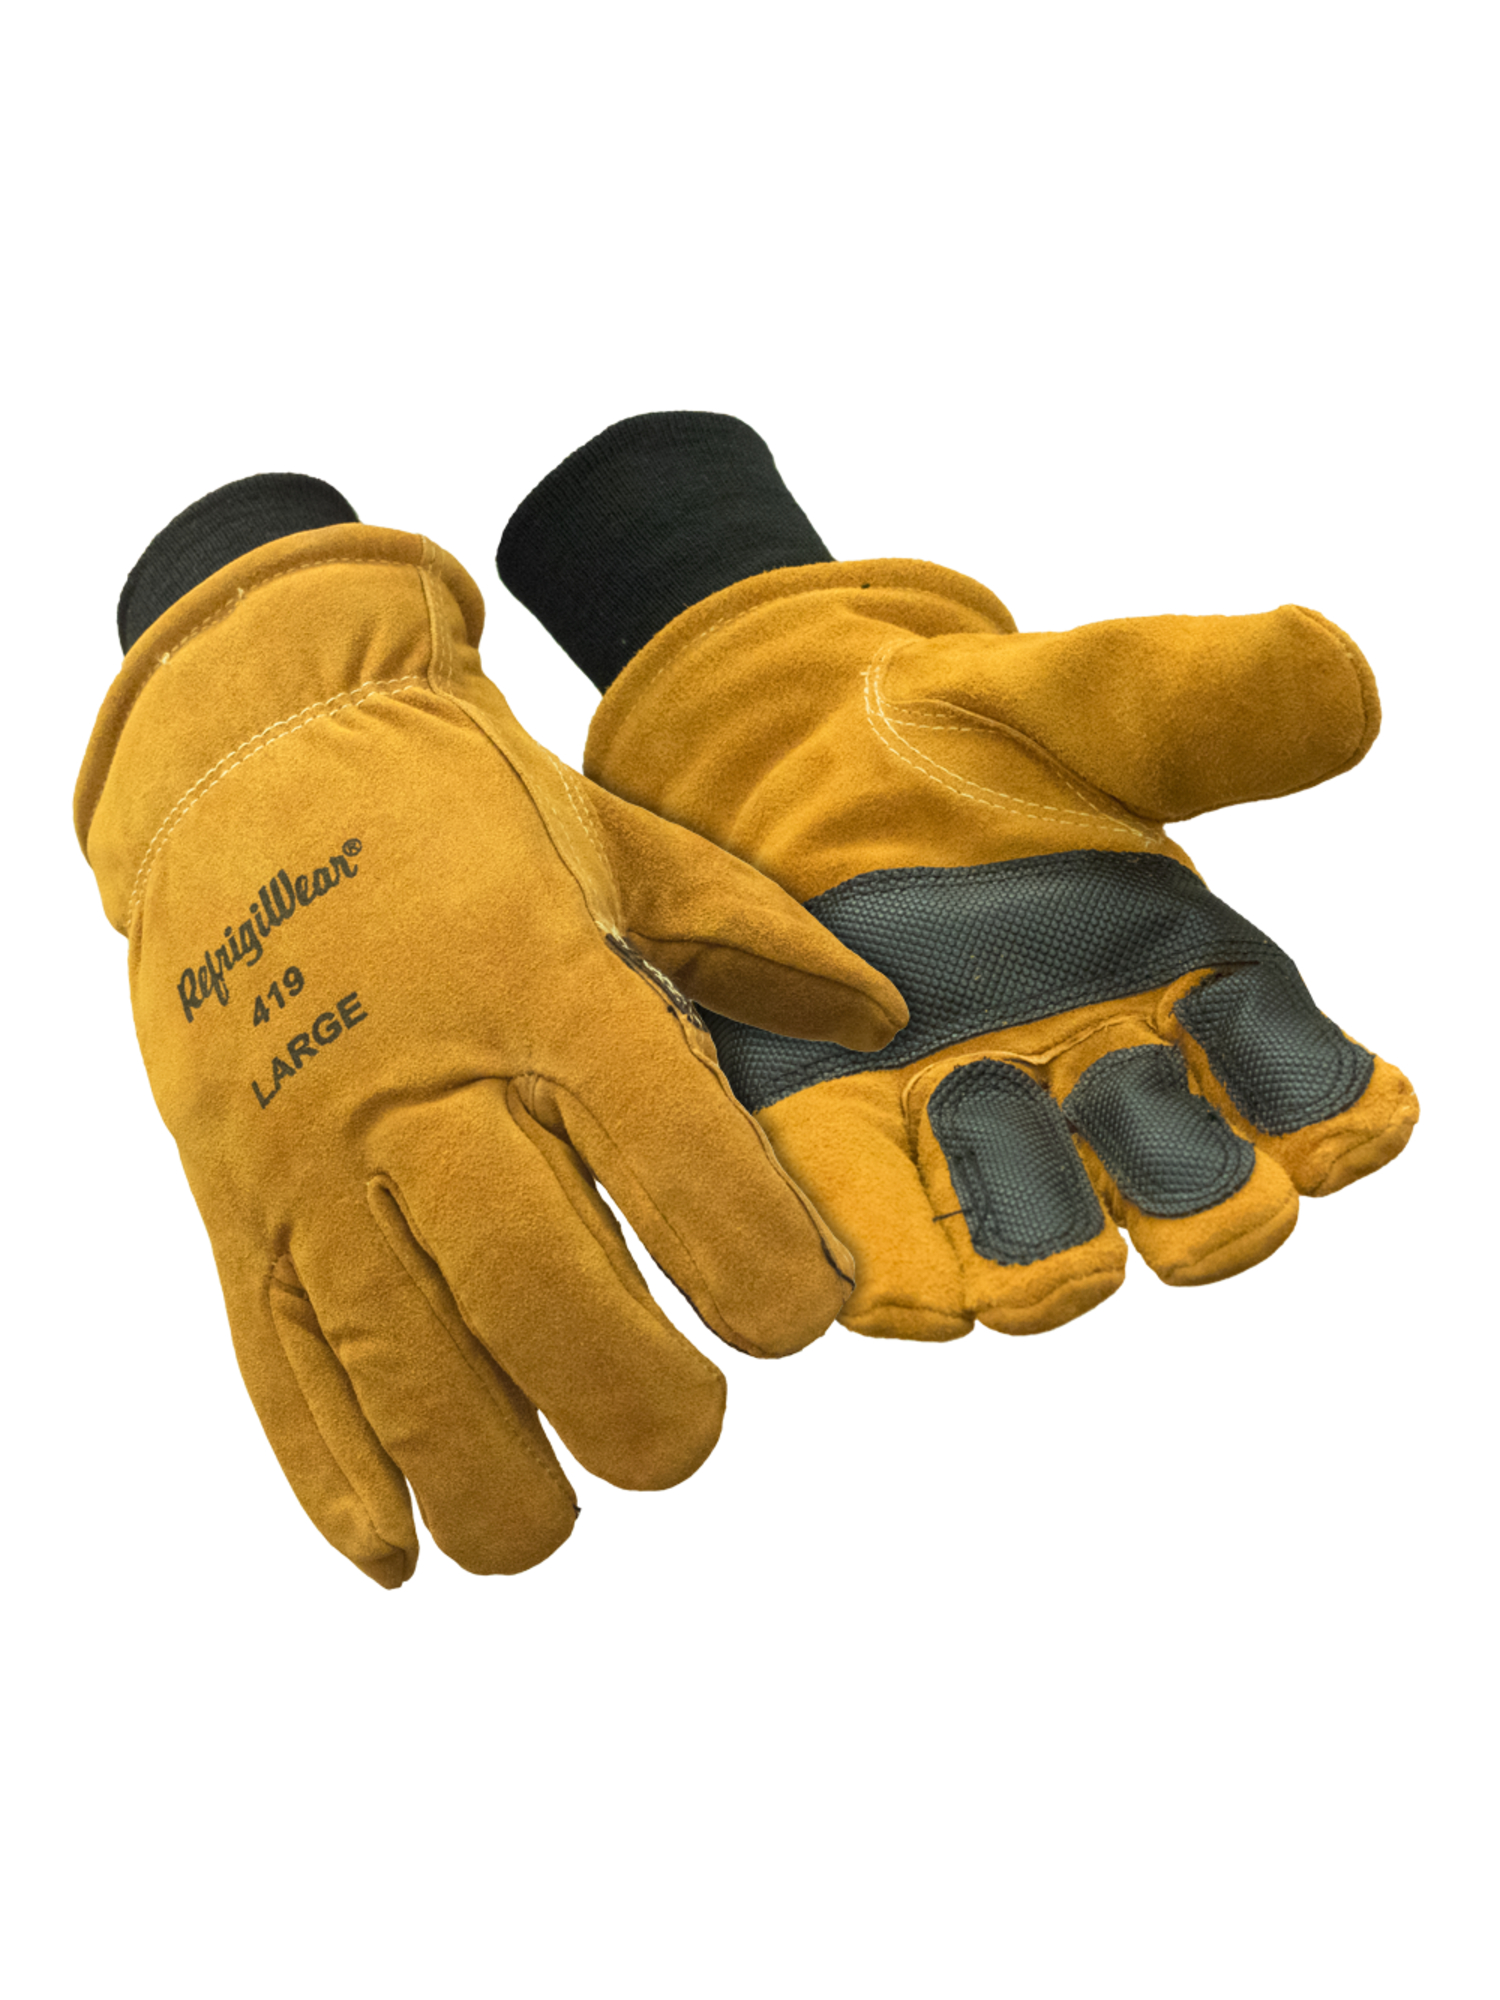 Cowhide Leather Work Gloves with Impact Protection, X-Large